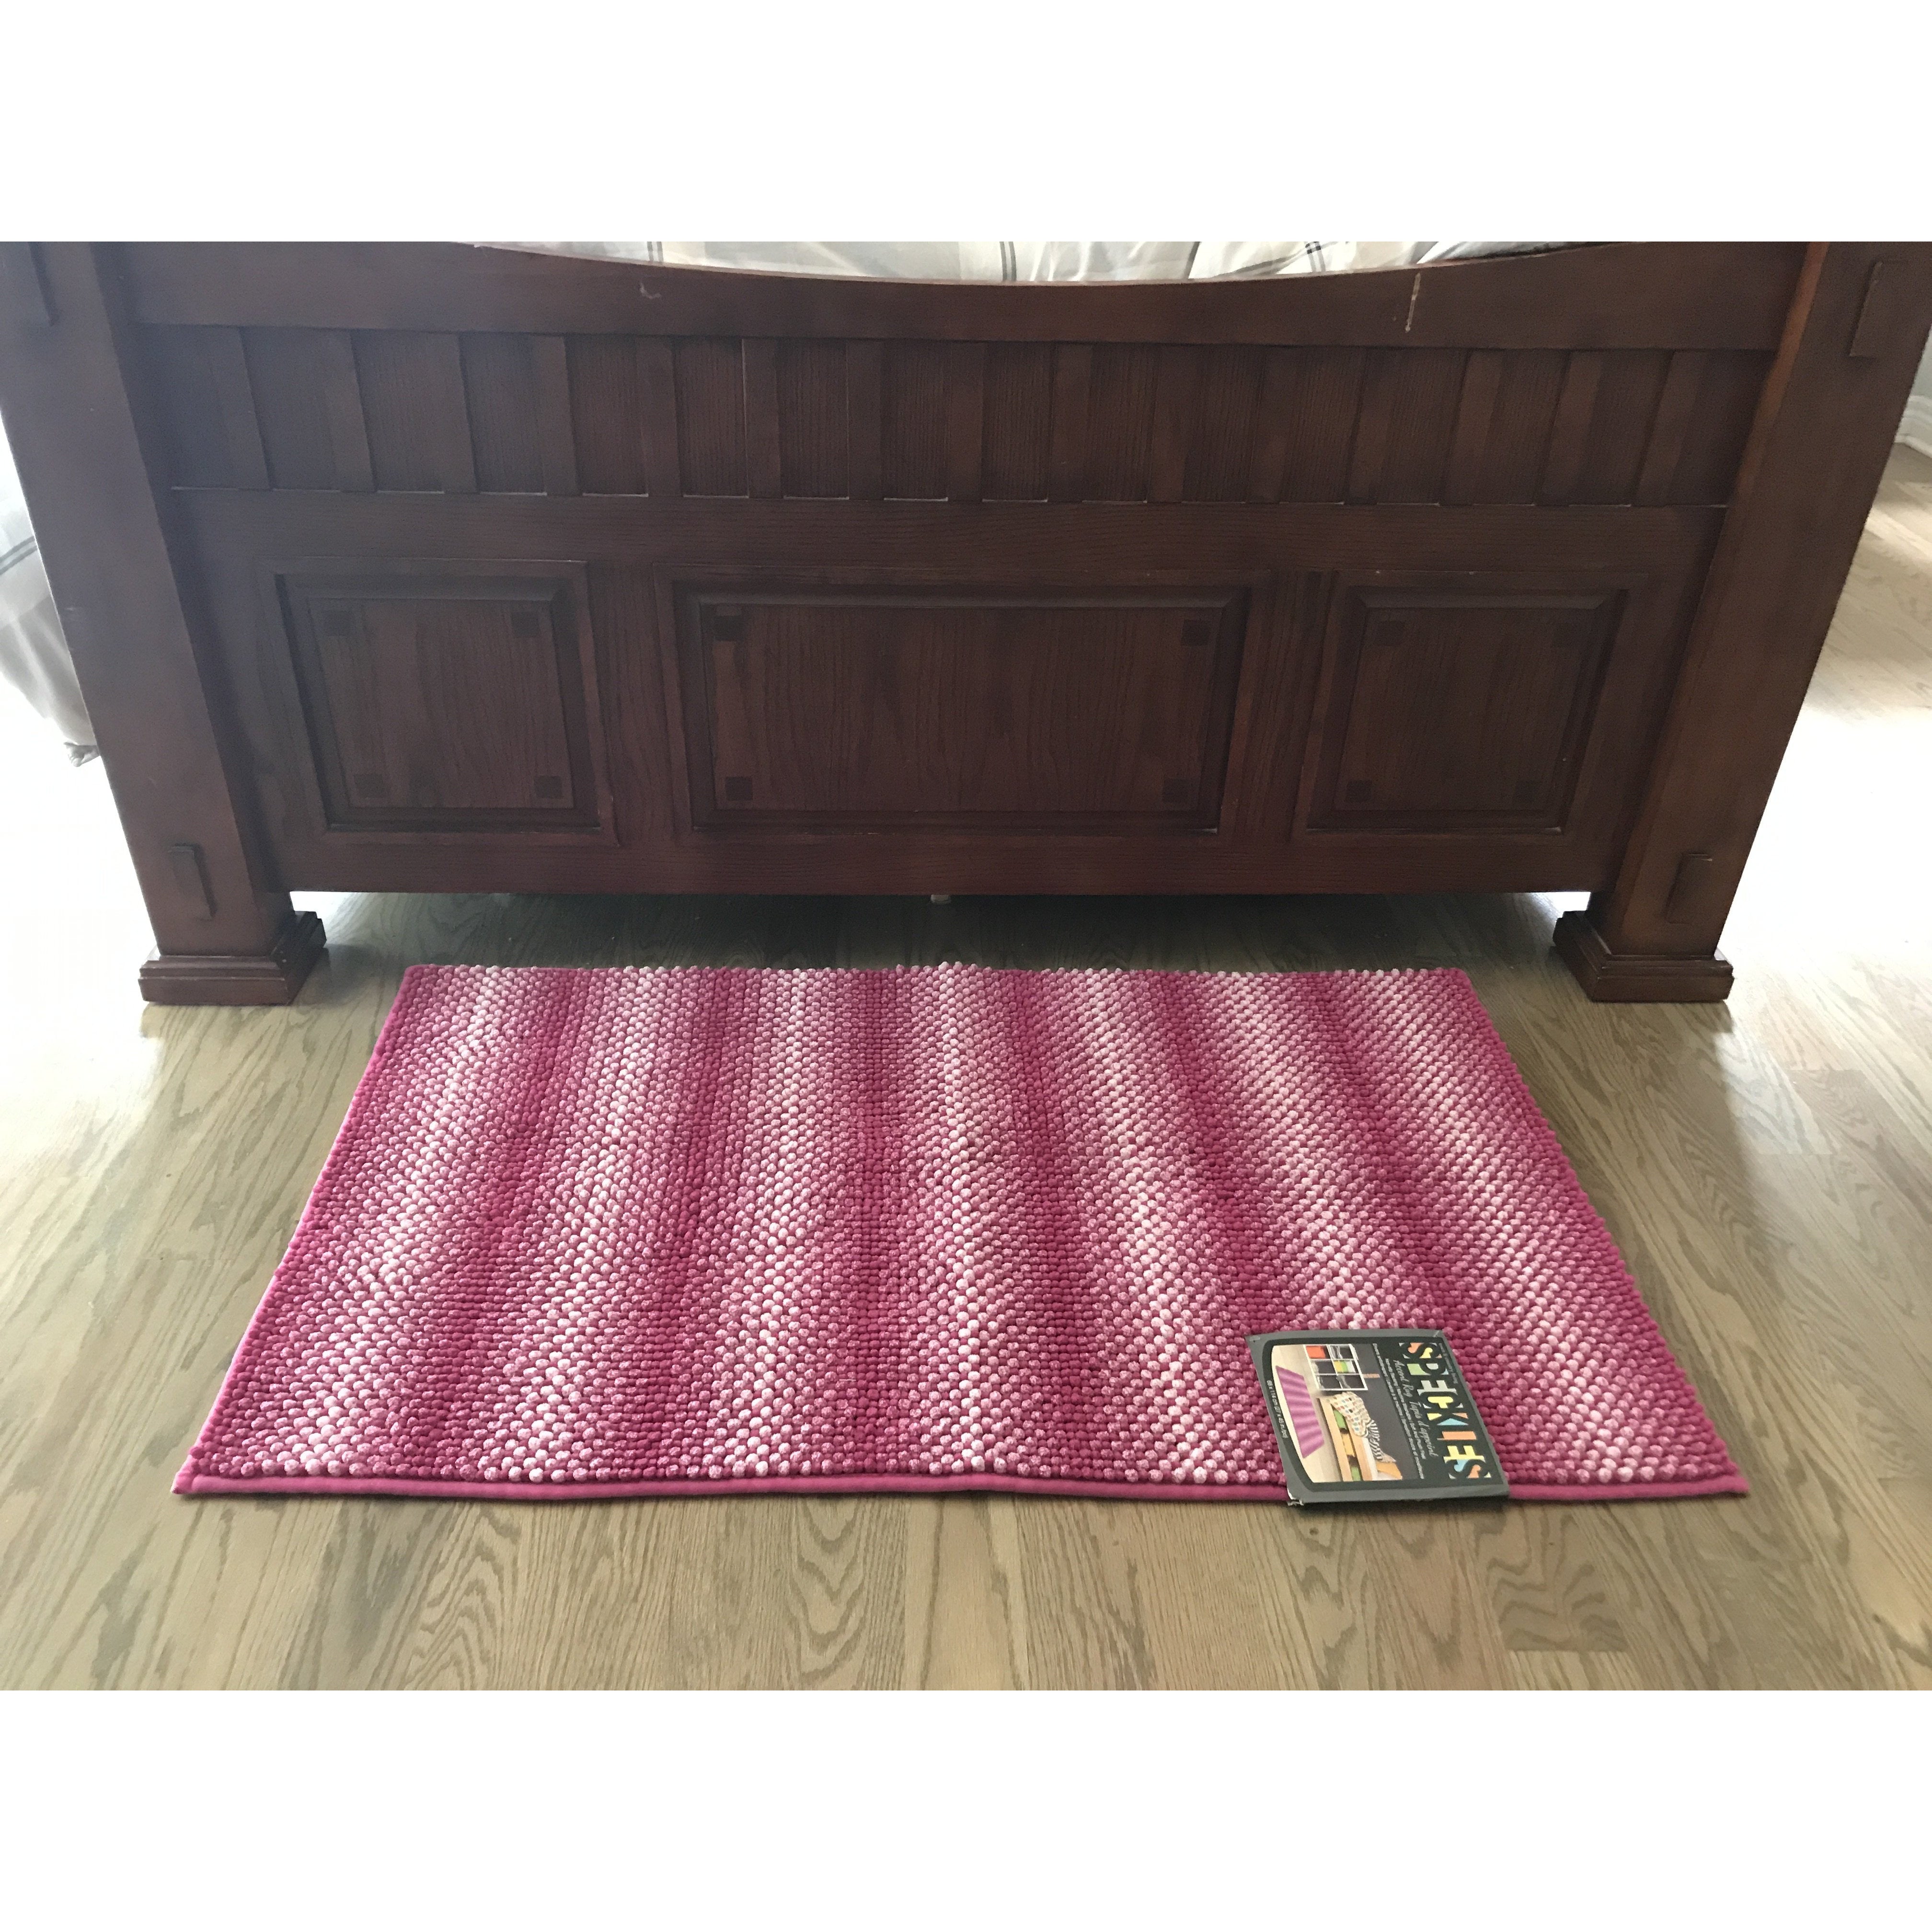 Speckles Pink/White Accent Rug: 27 x 45"